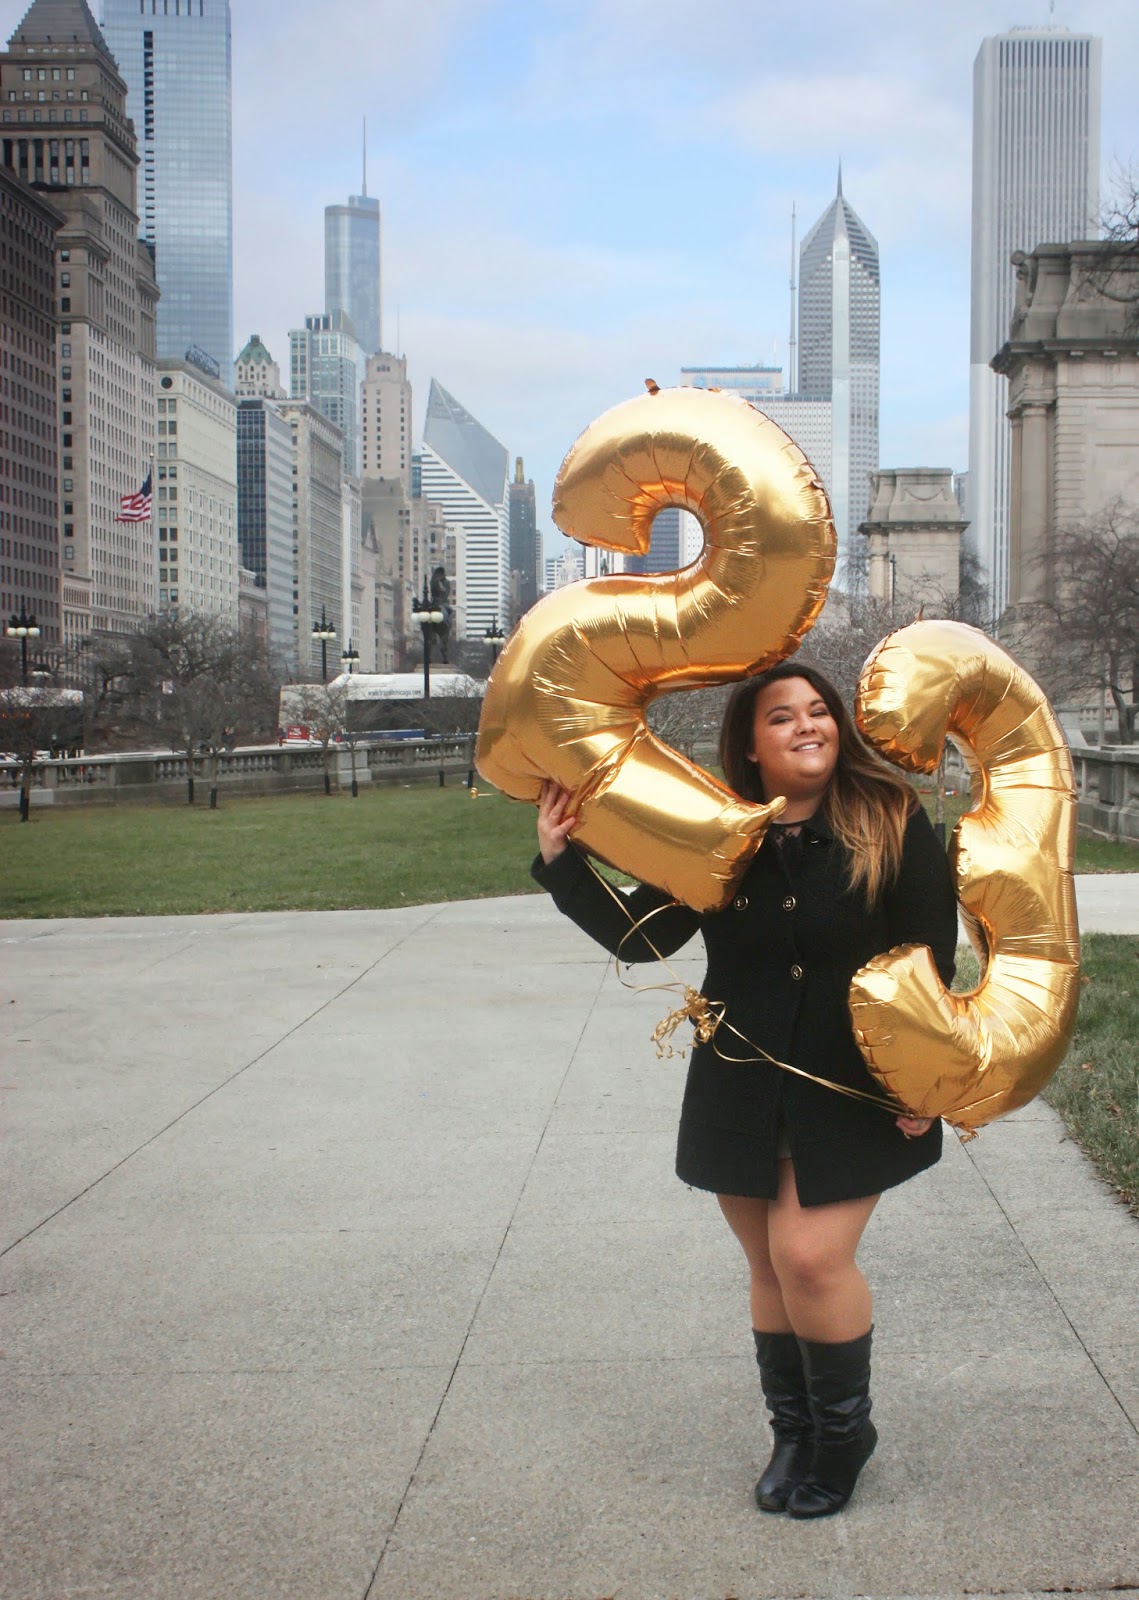 fatshion, fashion blogger, fat girl fashion, happy birthday, gold number balloons,  feeling 22, 23rd birthday, natalie craig, natalie in the city, betsey Johnson coat, skirt, thick girls, plus size fashion blogger, inspirational, college graduate, columbia college chicago, USA today, steve harvey show, embrace your curves